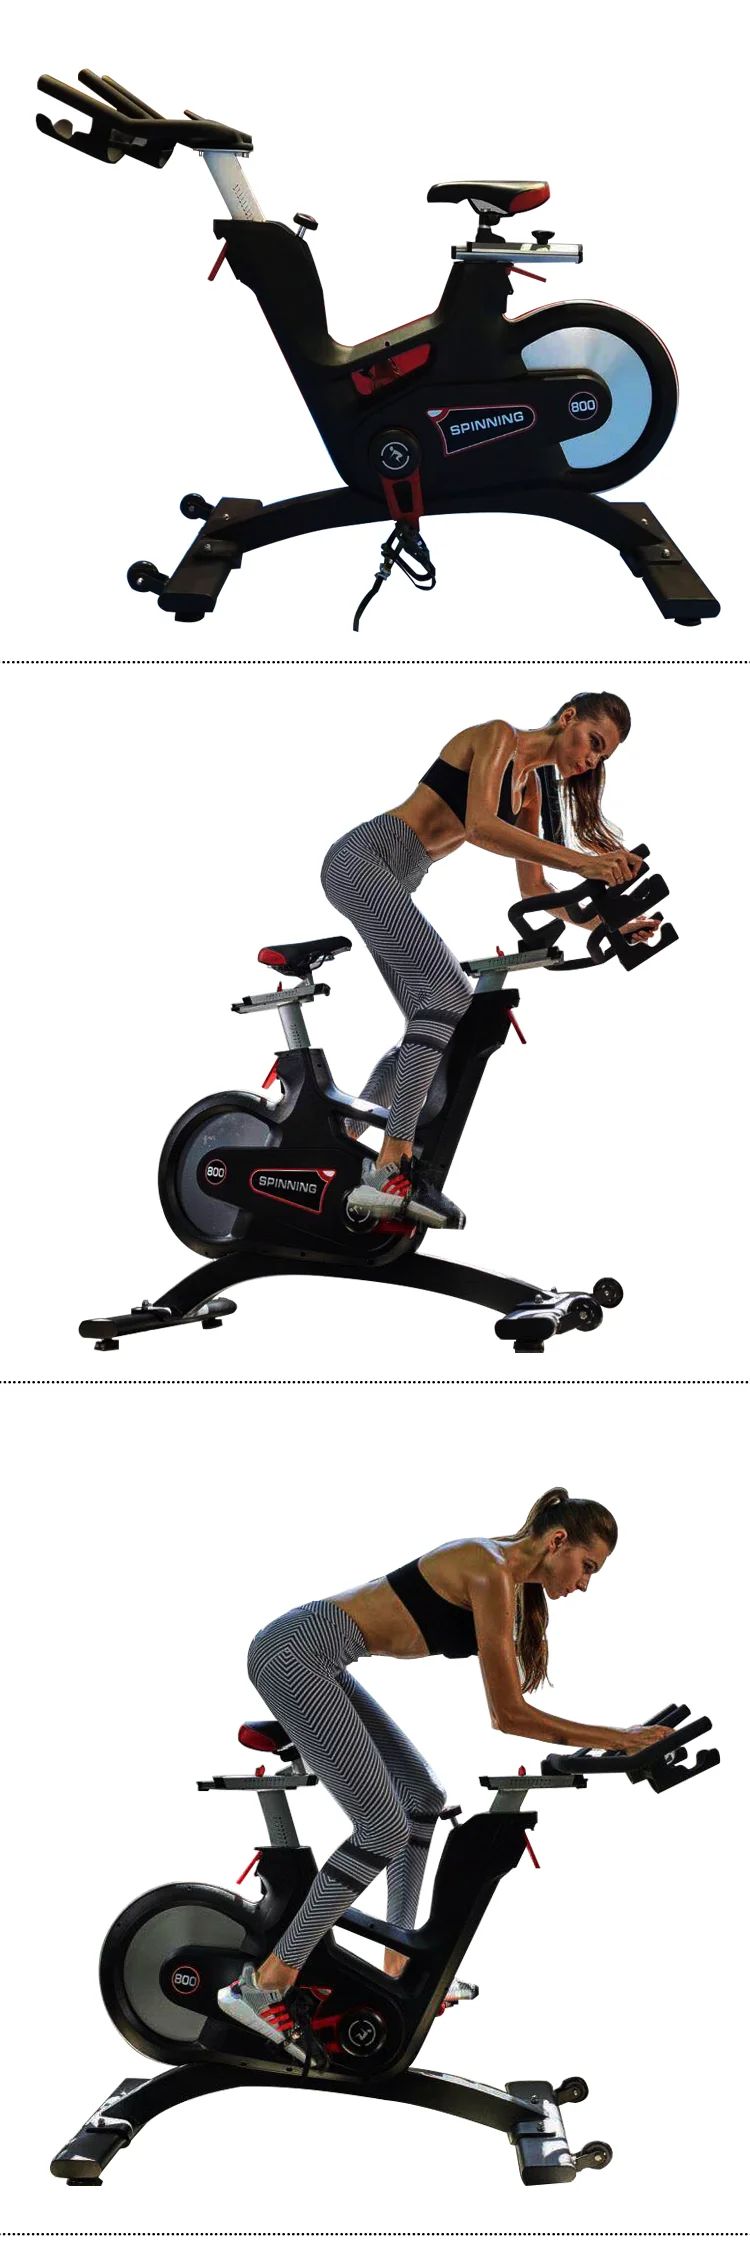 Commerical spinning bike wholesale professional spin bike home use